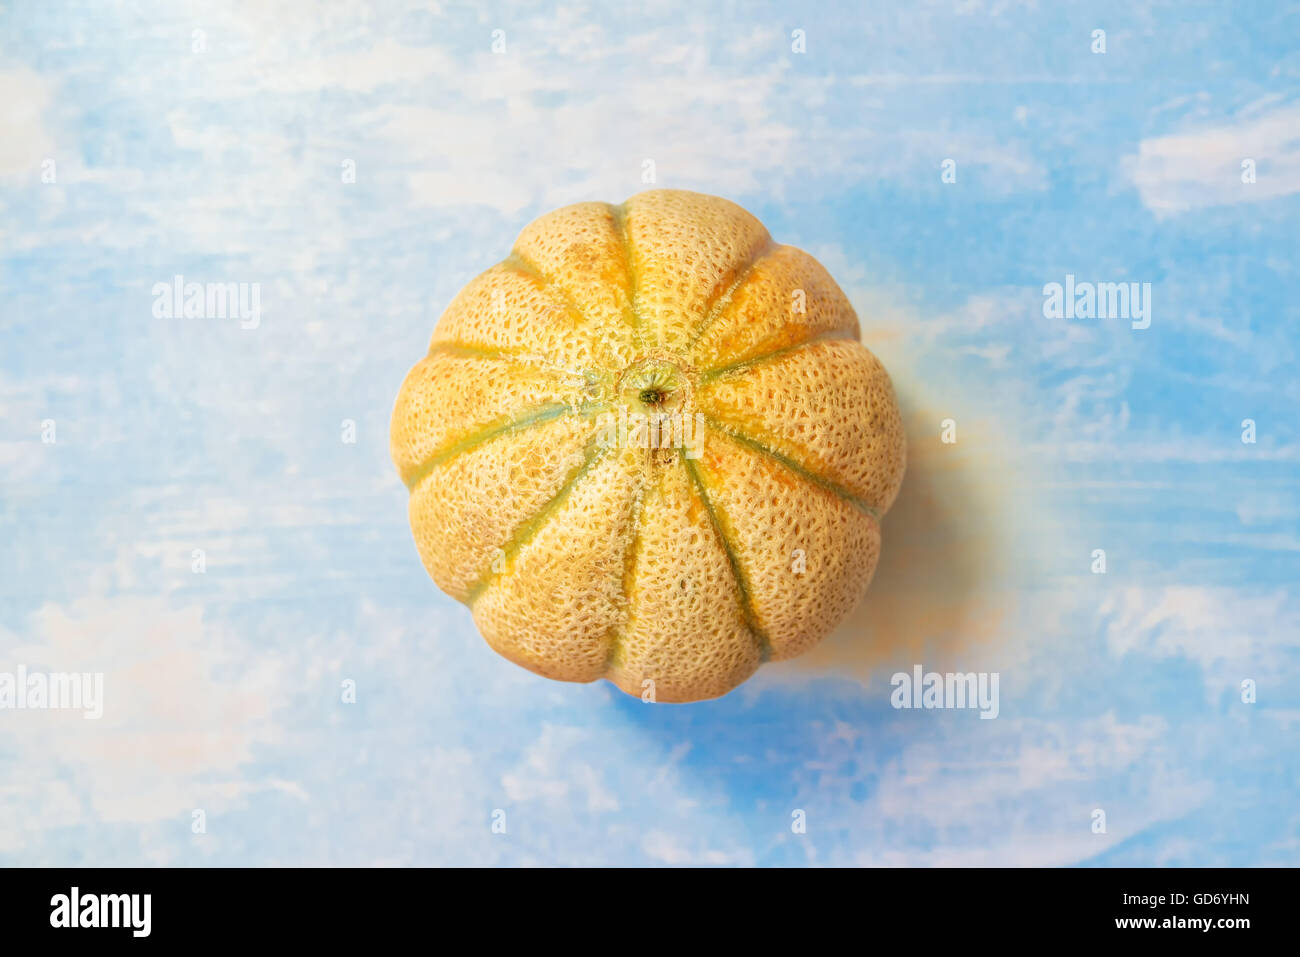 Cantaloupe melon on rustic wooden table, top view of whole fruit Stock Photo